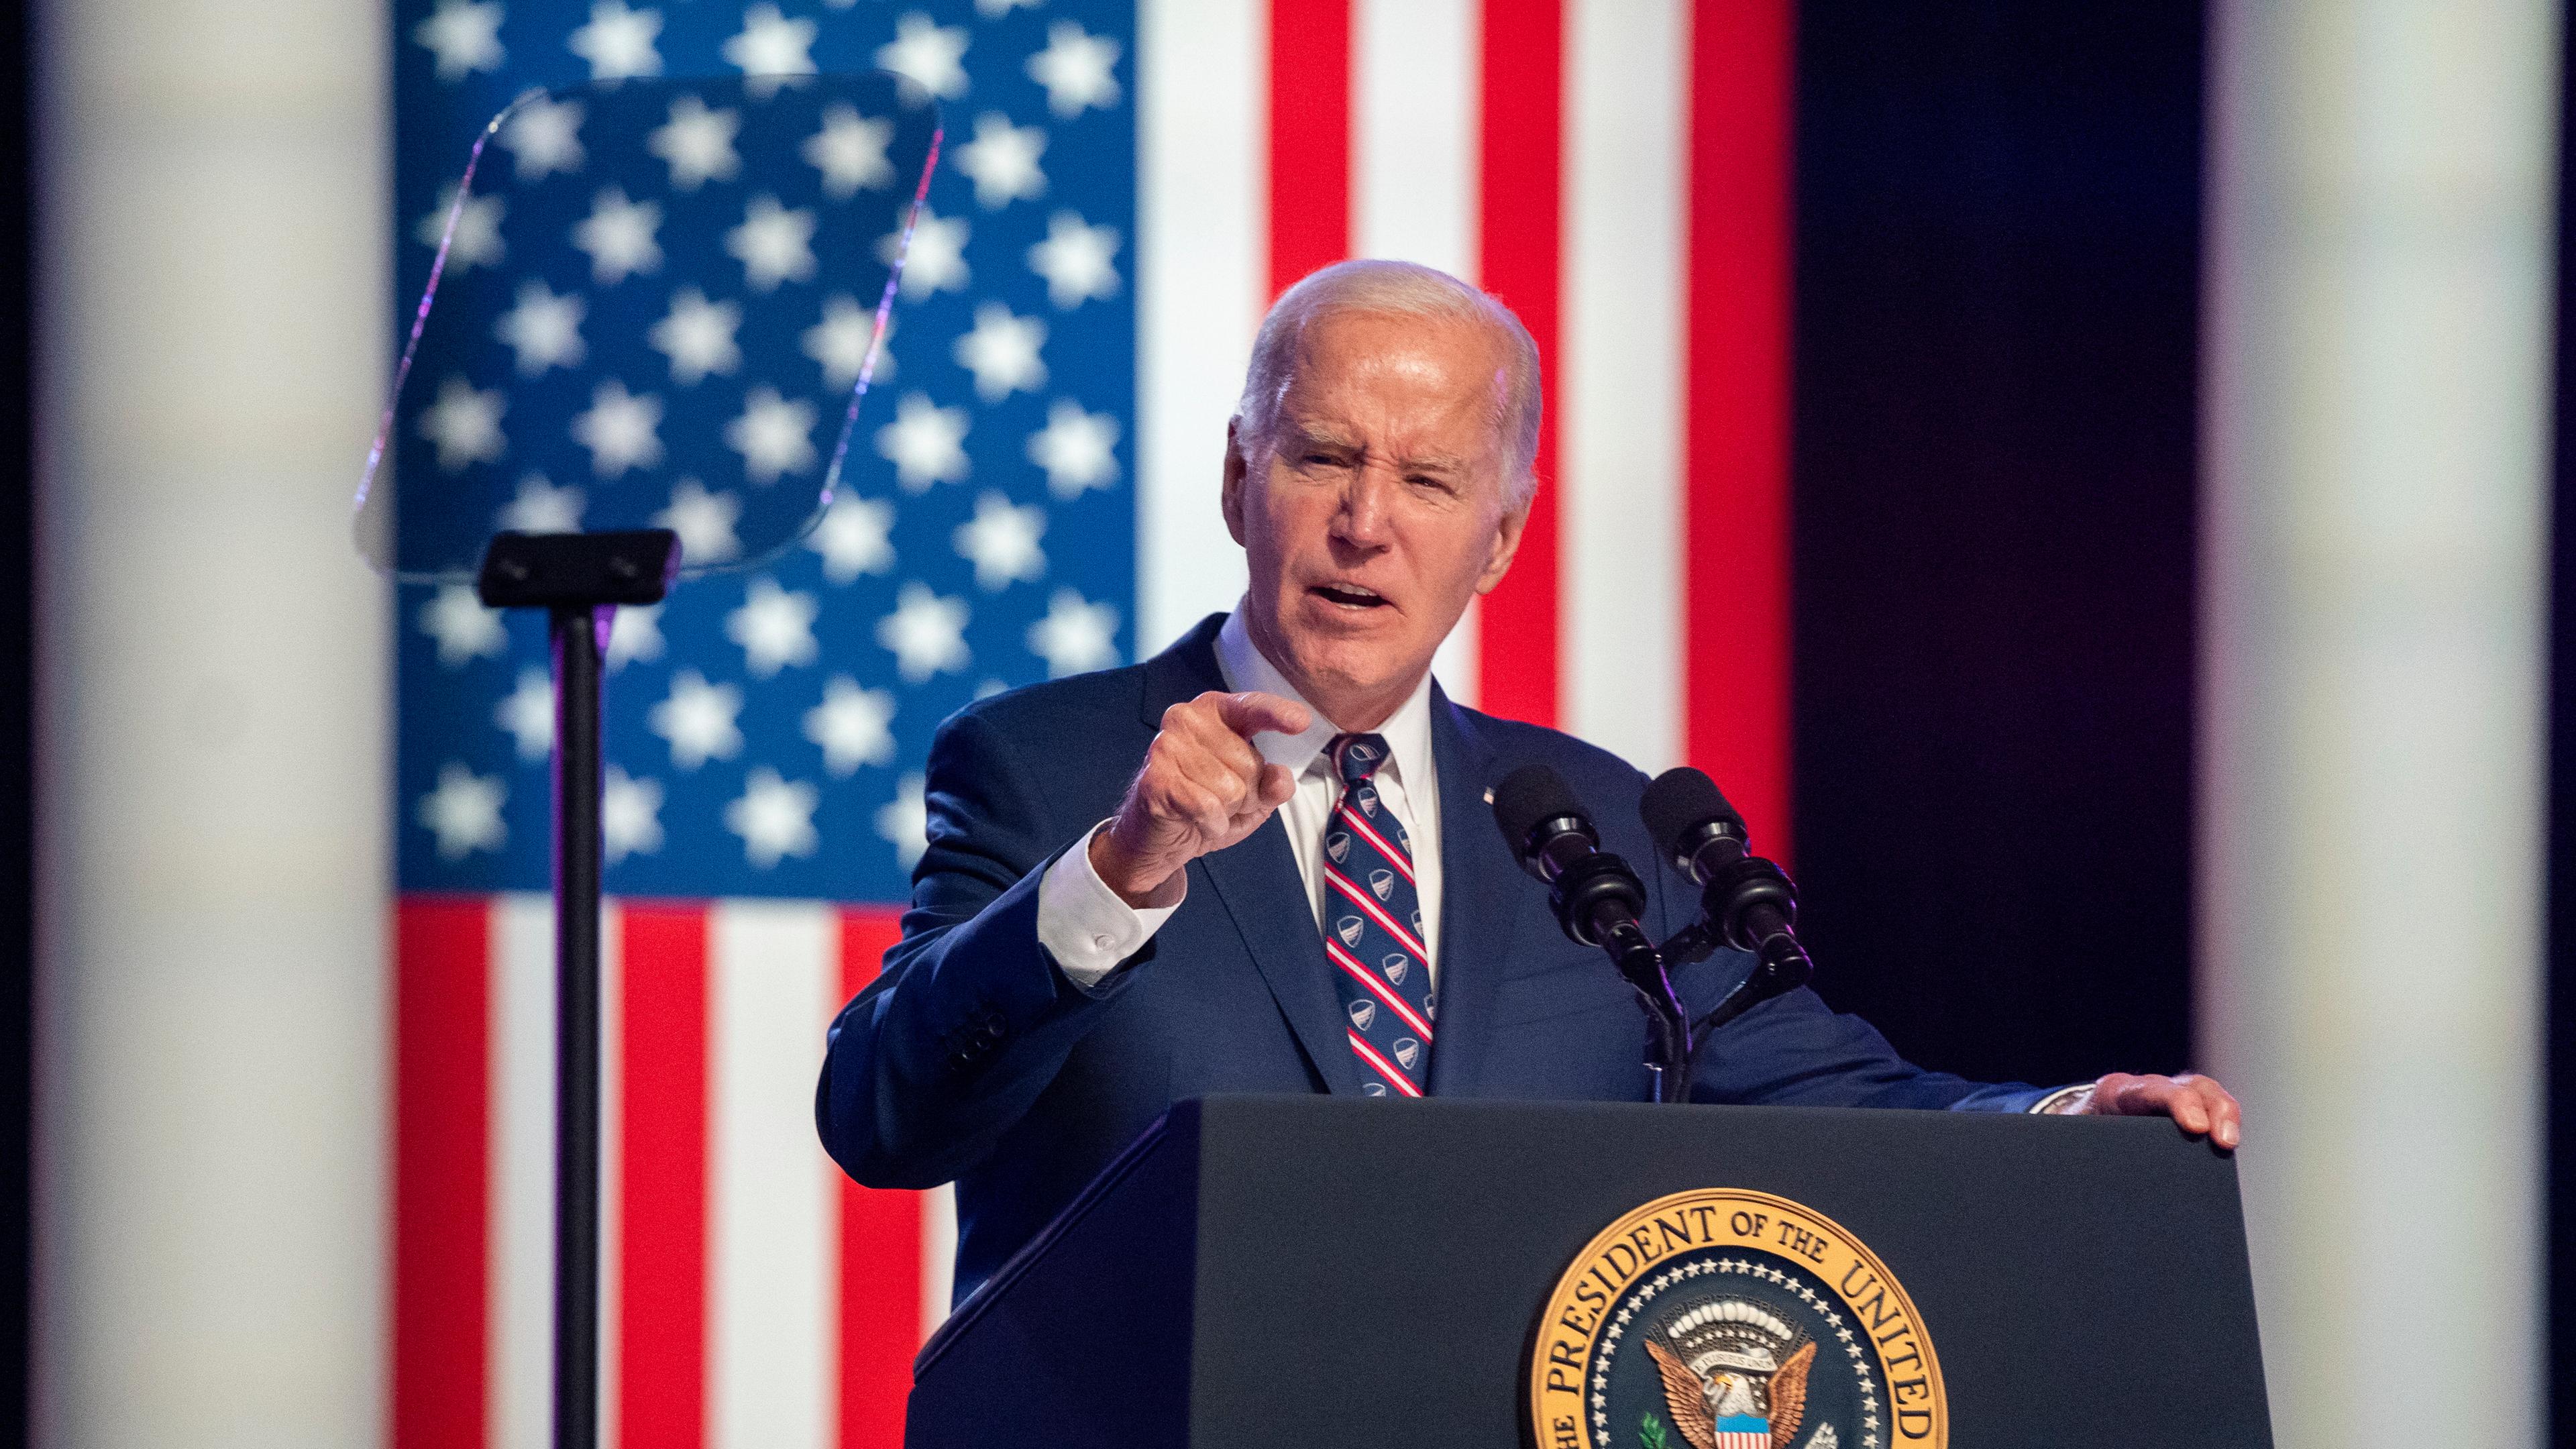 US President Joe Biden delivers a speech critical of former President Trump during a campaign event